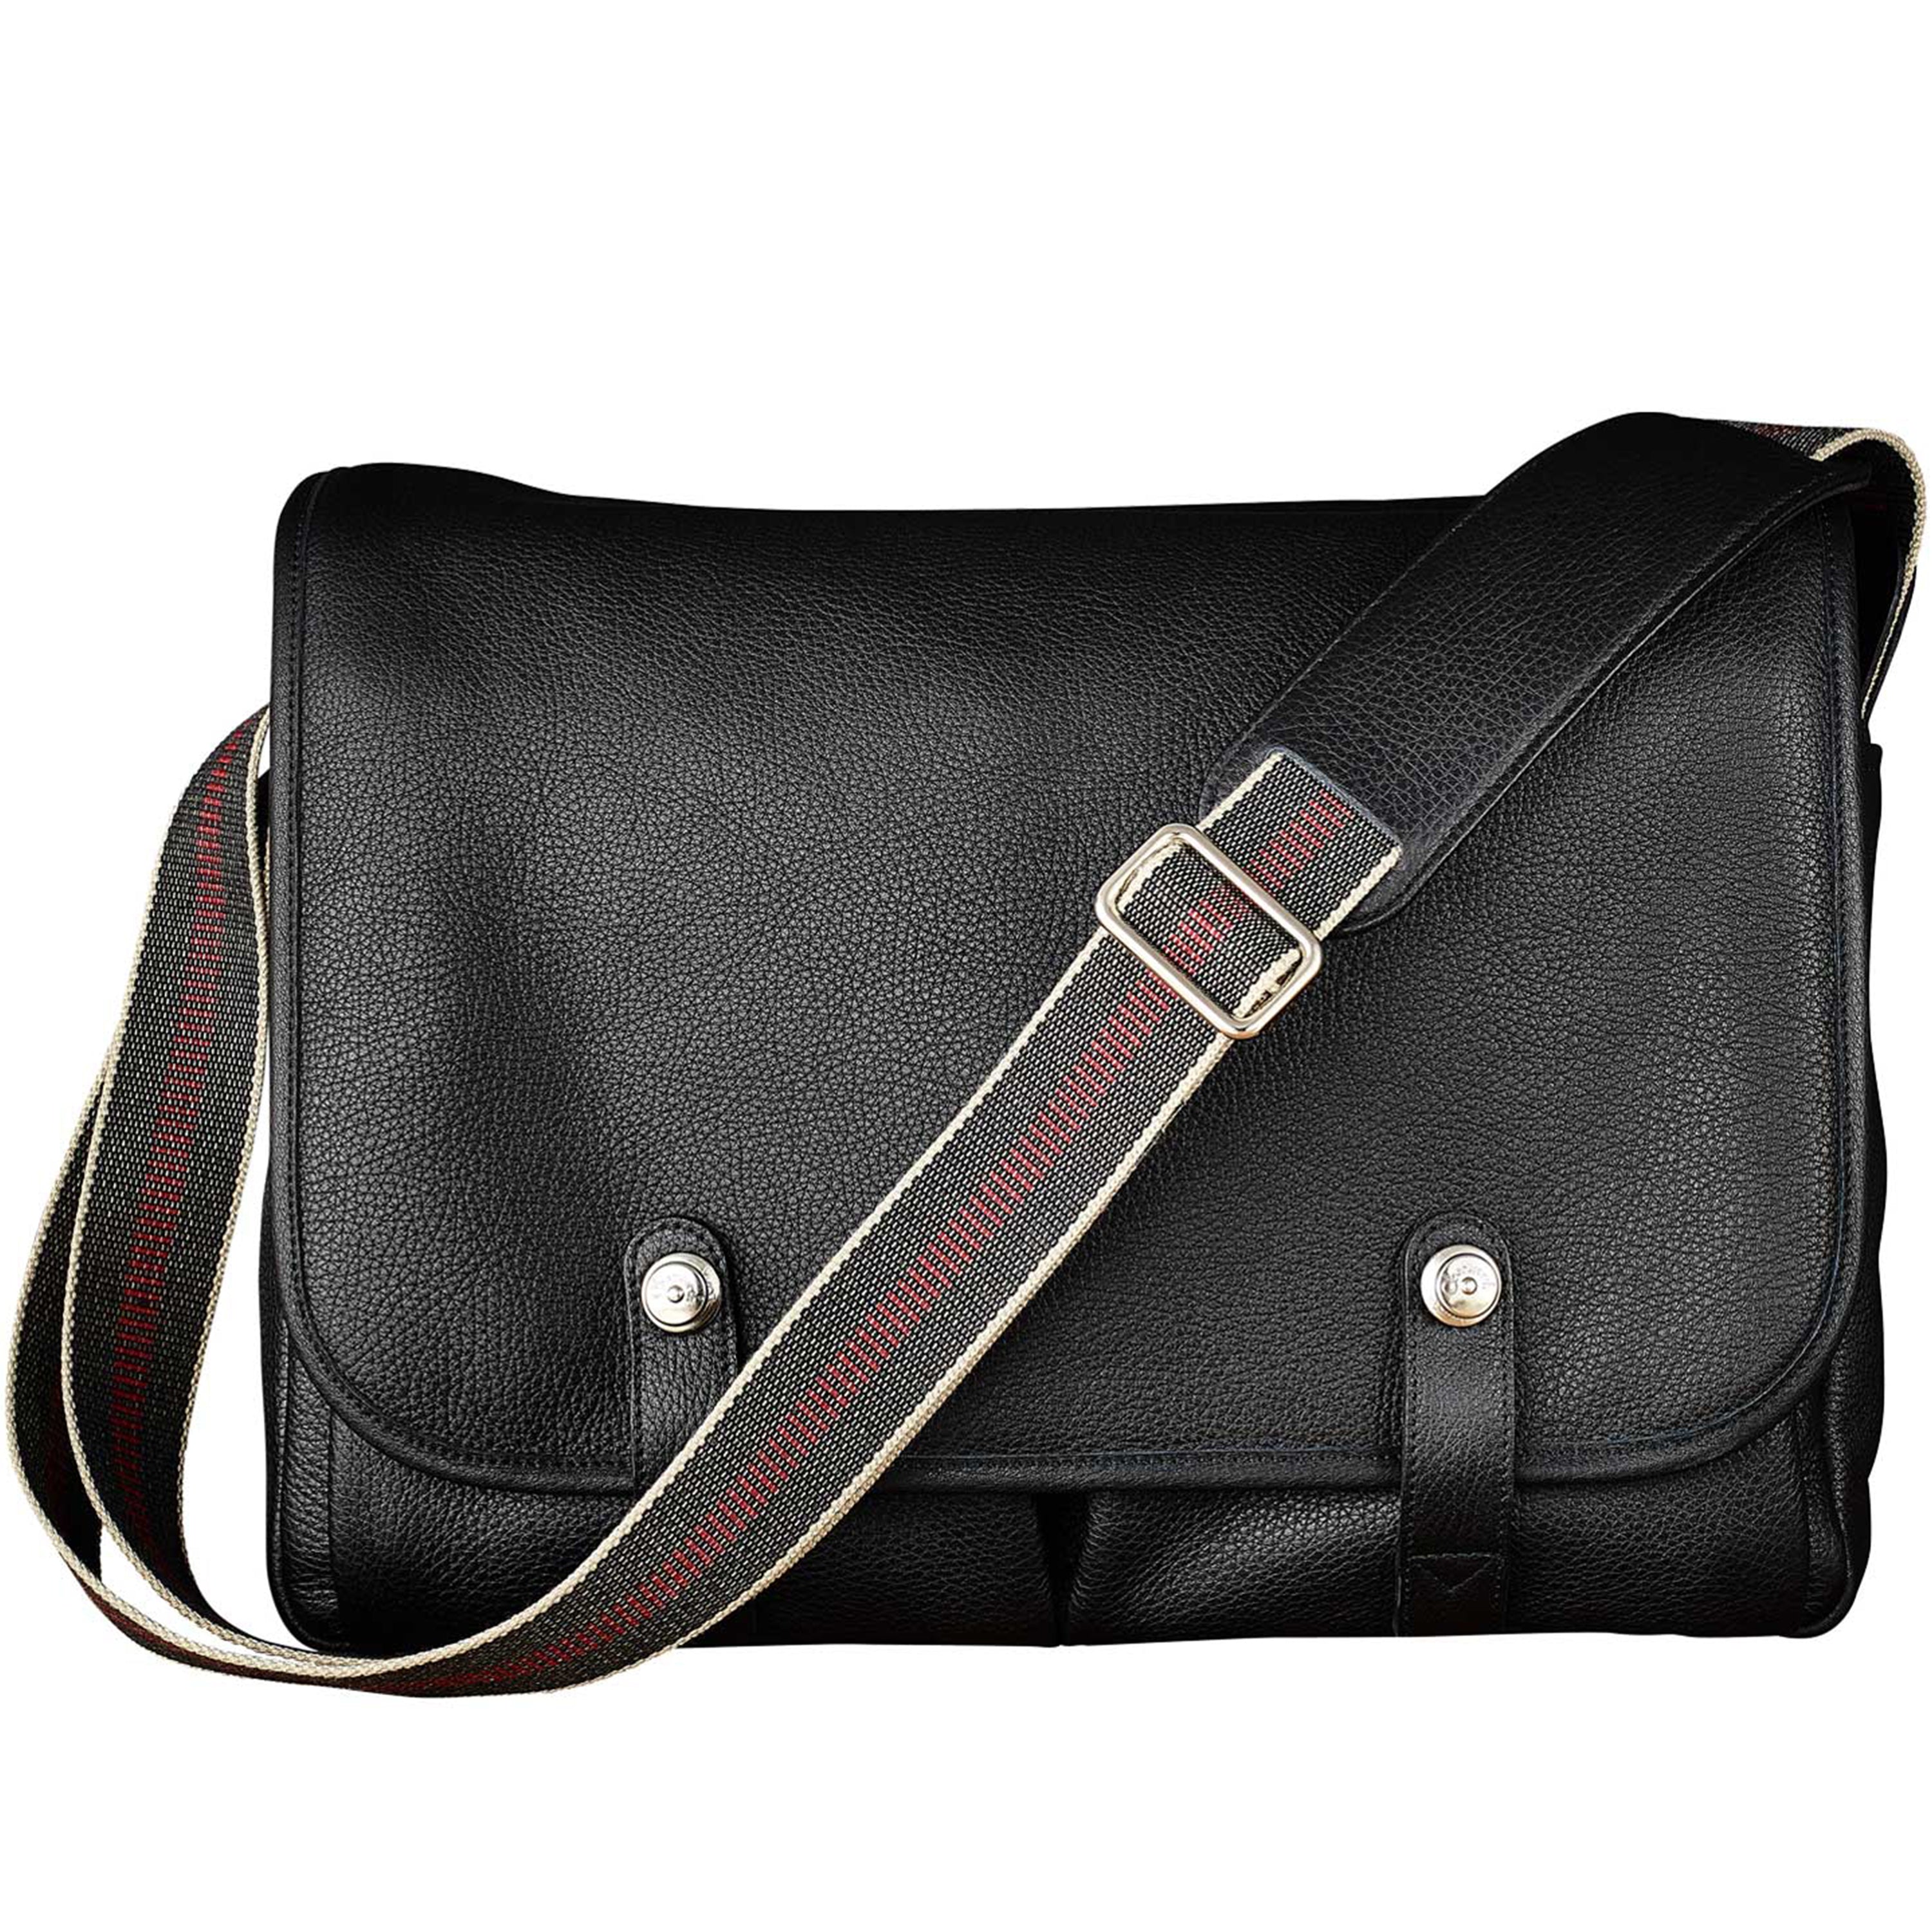 Oberwerth Richard X-Large Leather Camera/Business Bag, Black with Red Lining